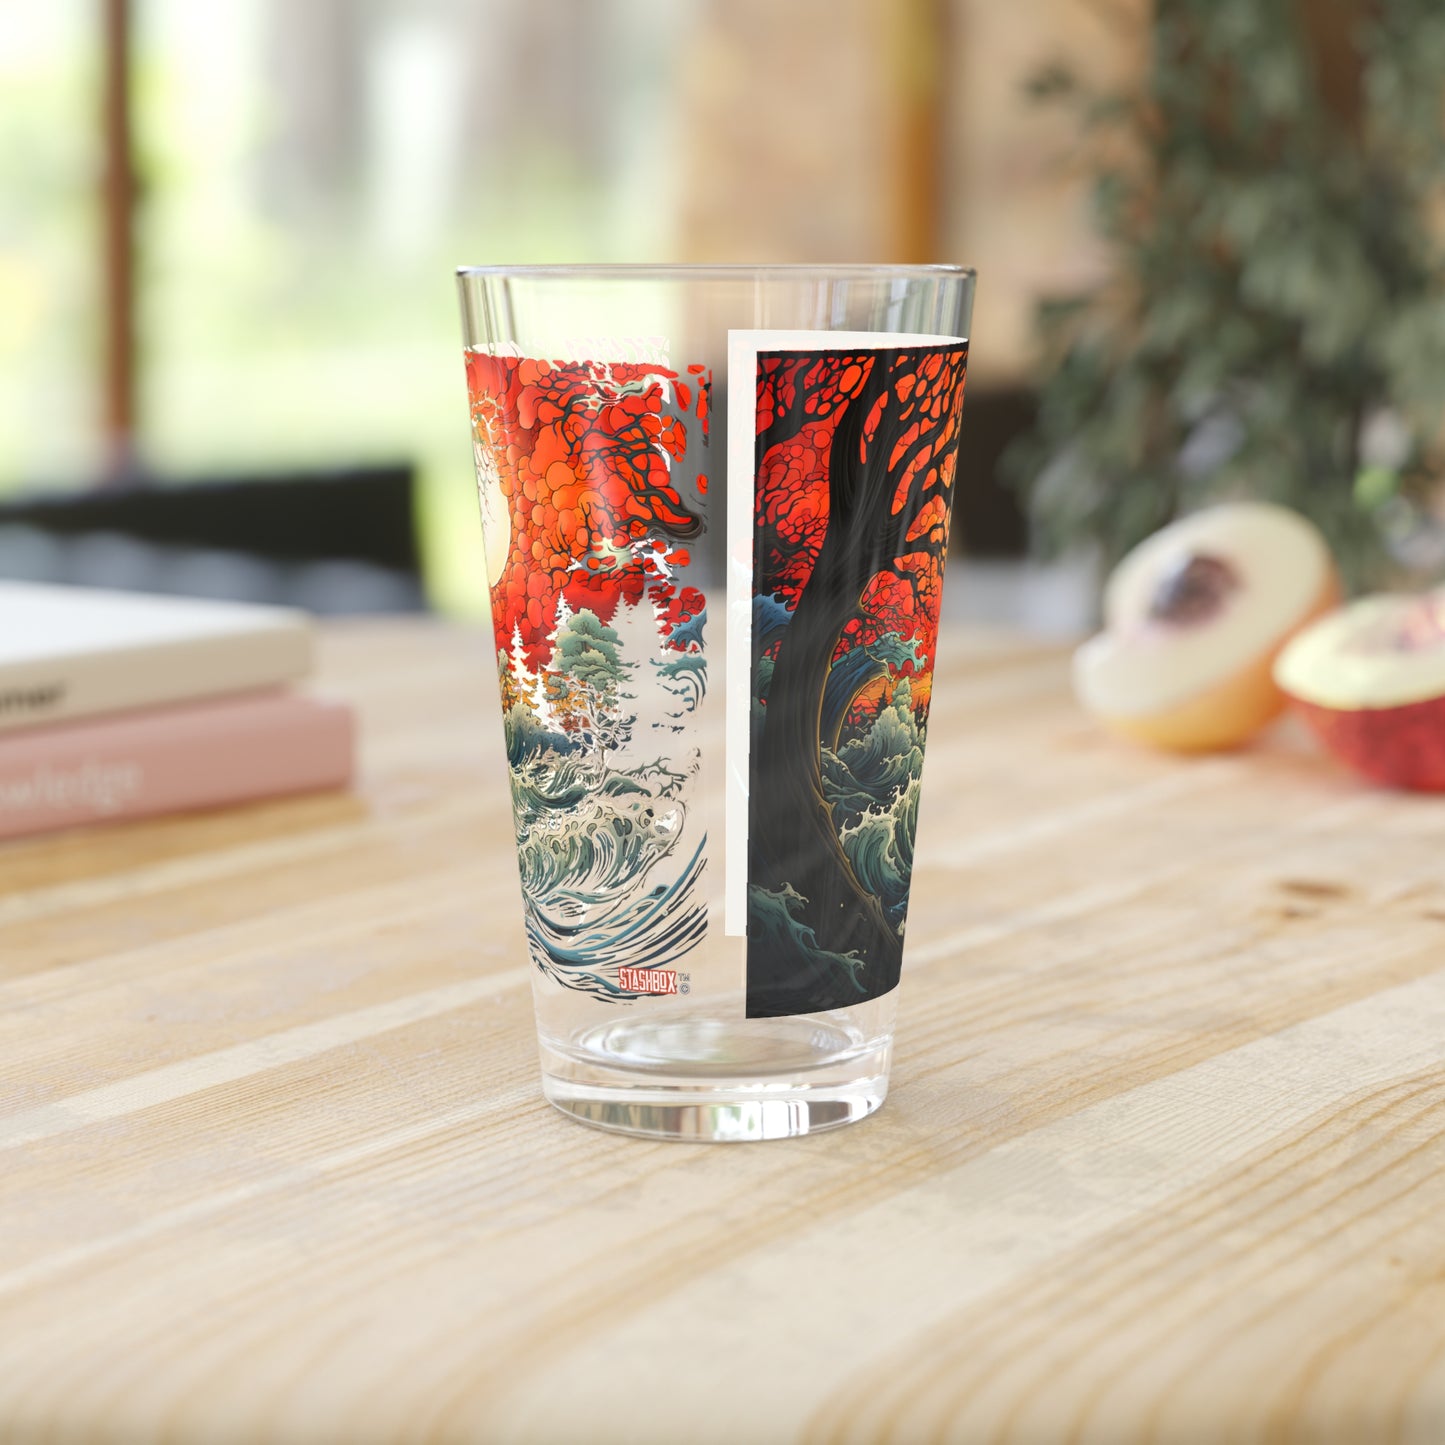 Nightmare by the Waves: Scary Sunset Night Beach 16oz Pint Glass - Waves Design #058. Beachfront chills, exclusively at Stashbox.ai.